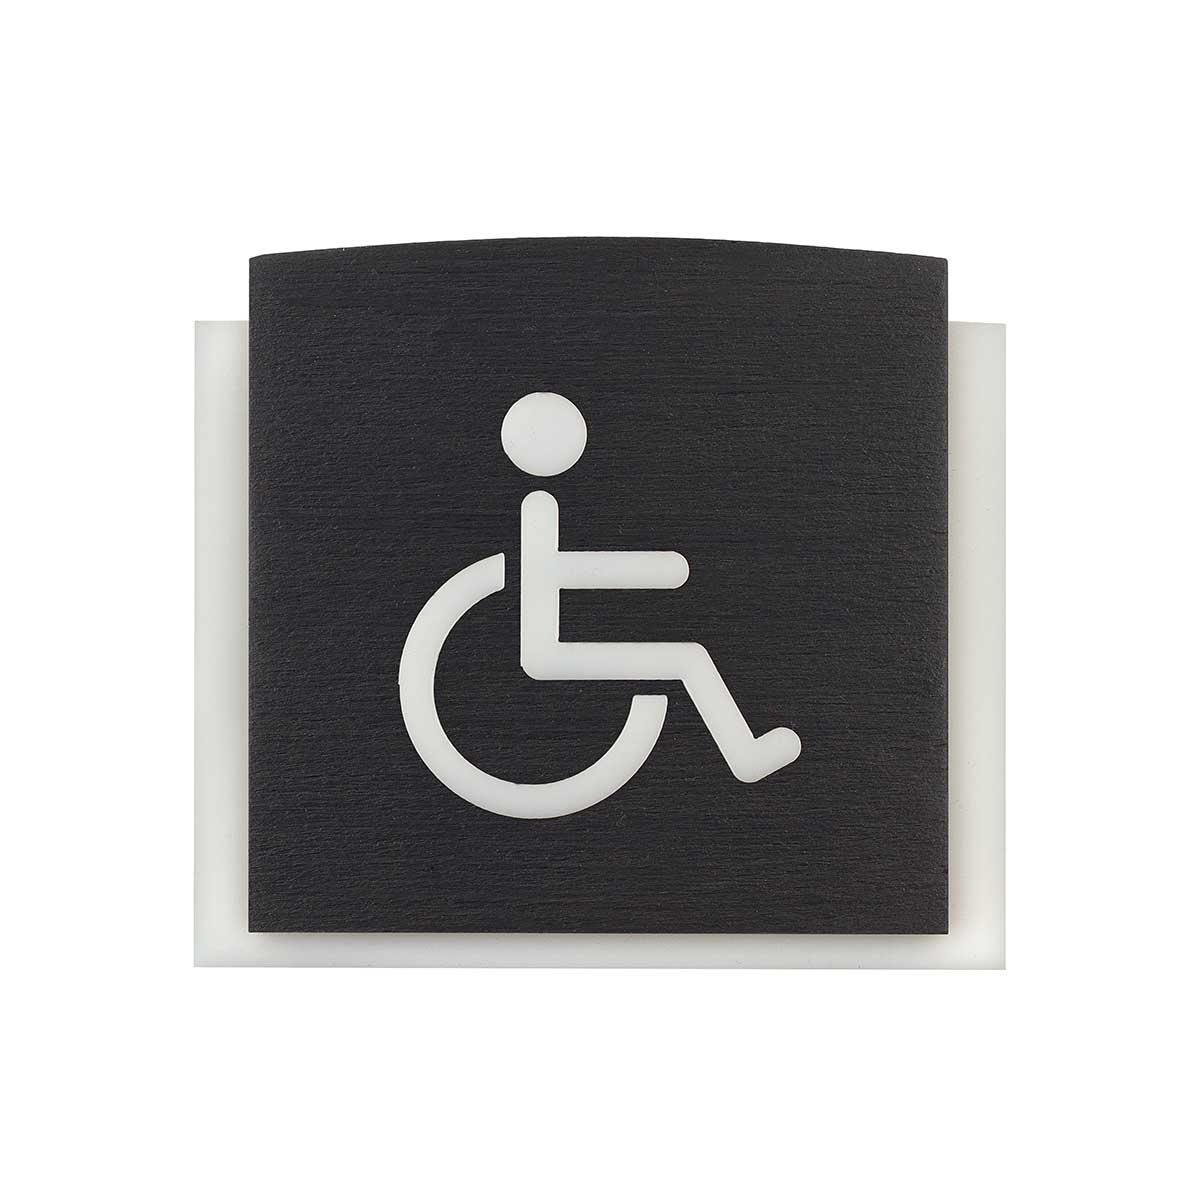 Wheelchair Wooden Bathroom Signs Bathroom Signs Anthracite Gray Bsign